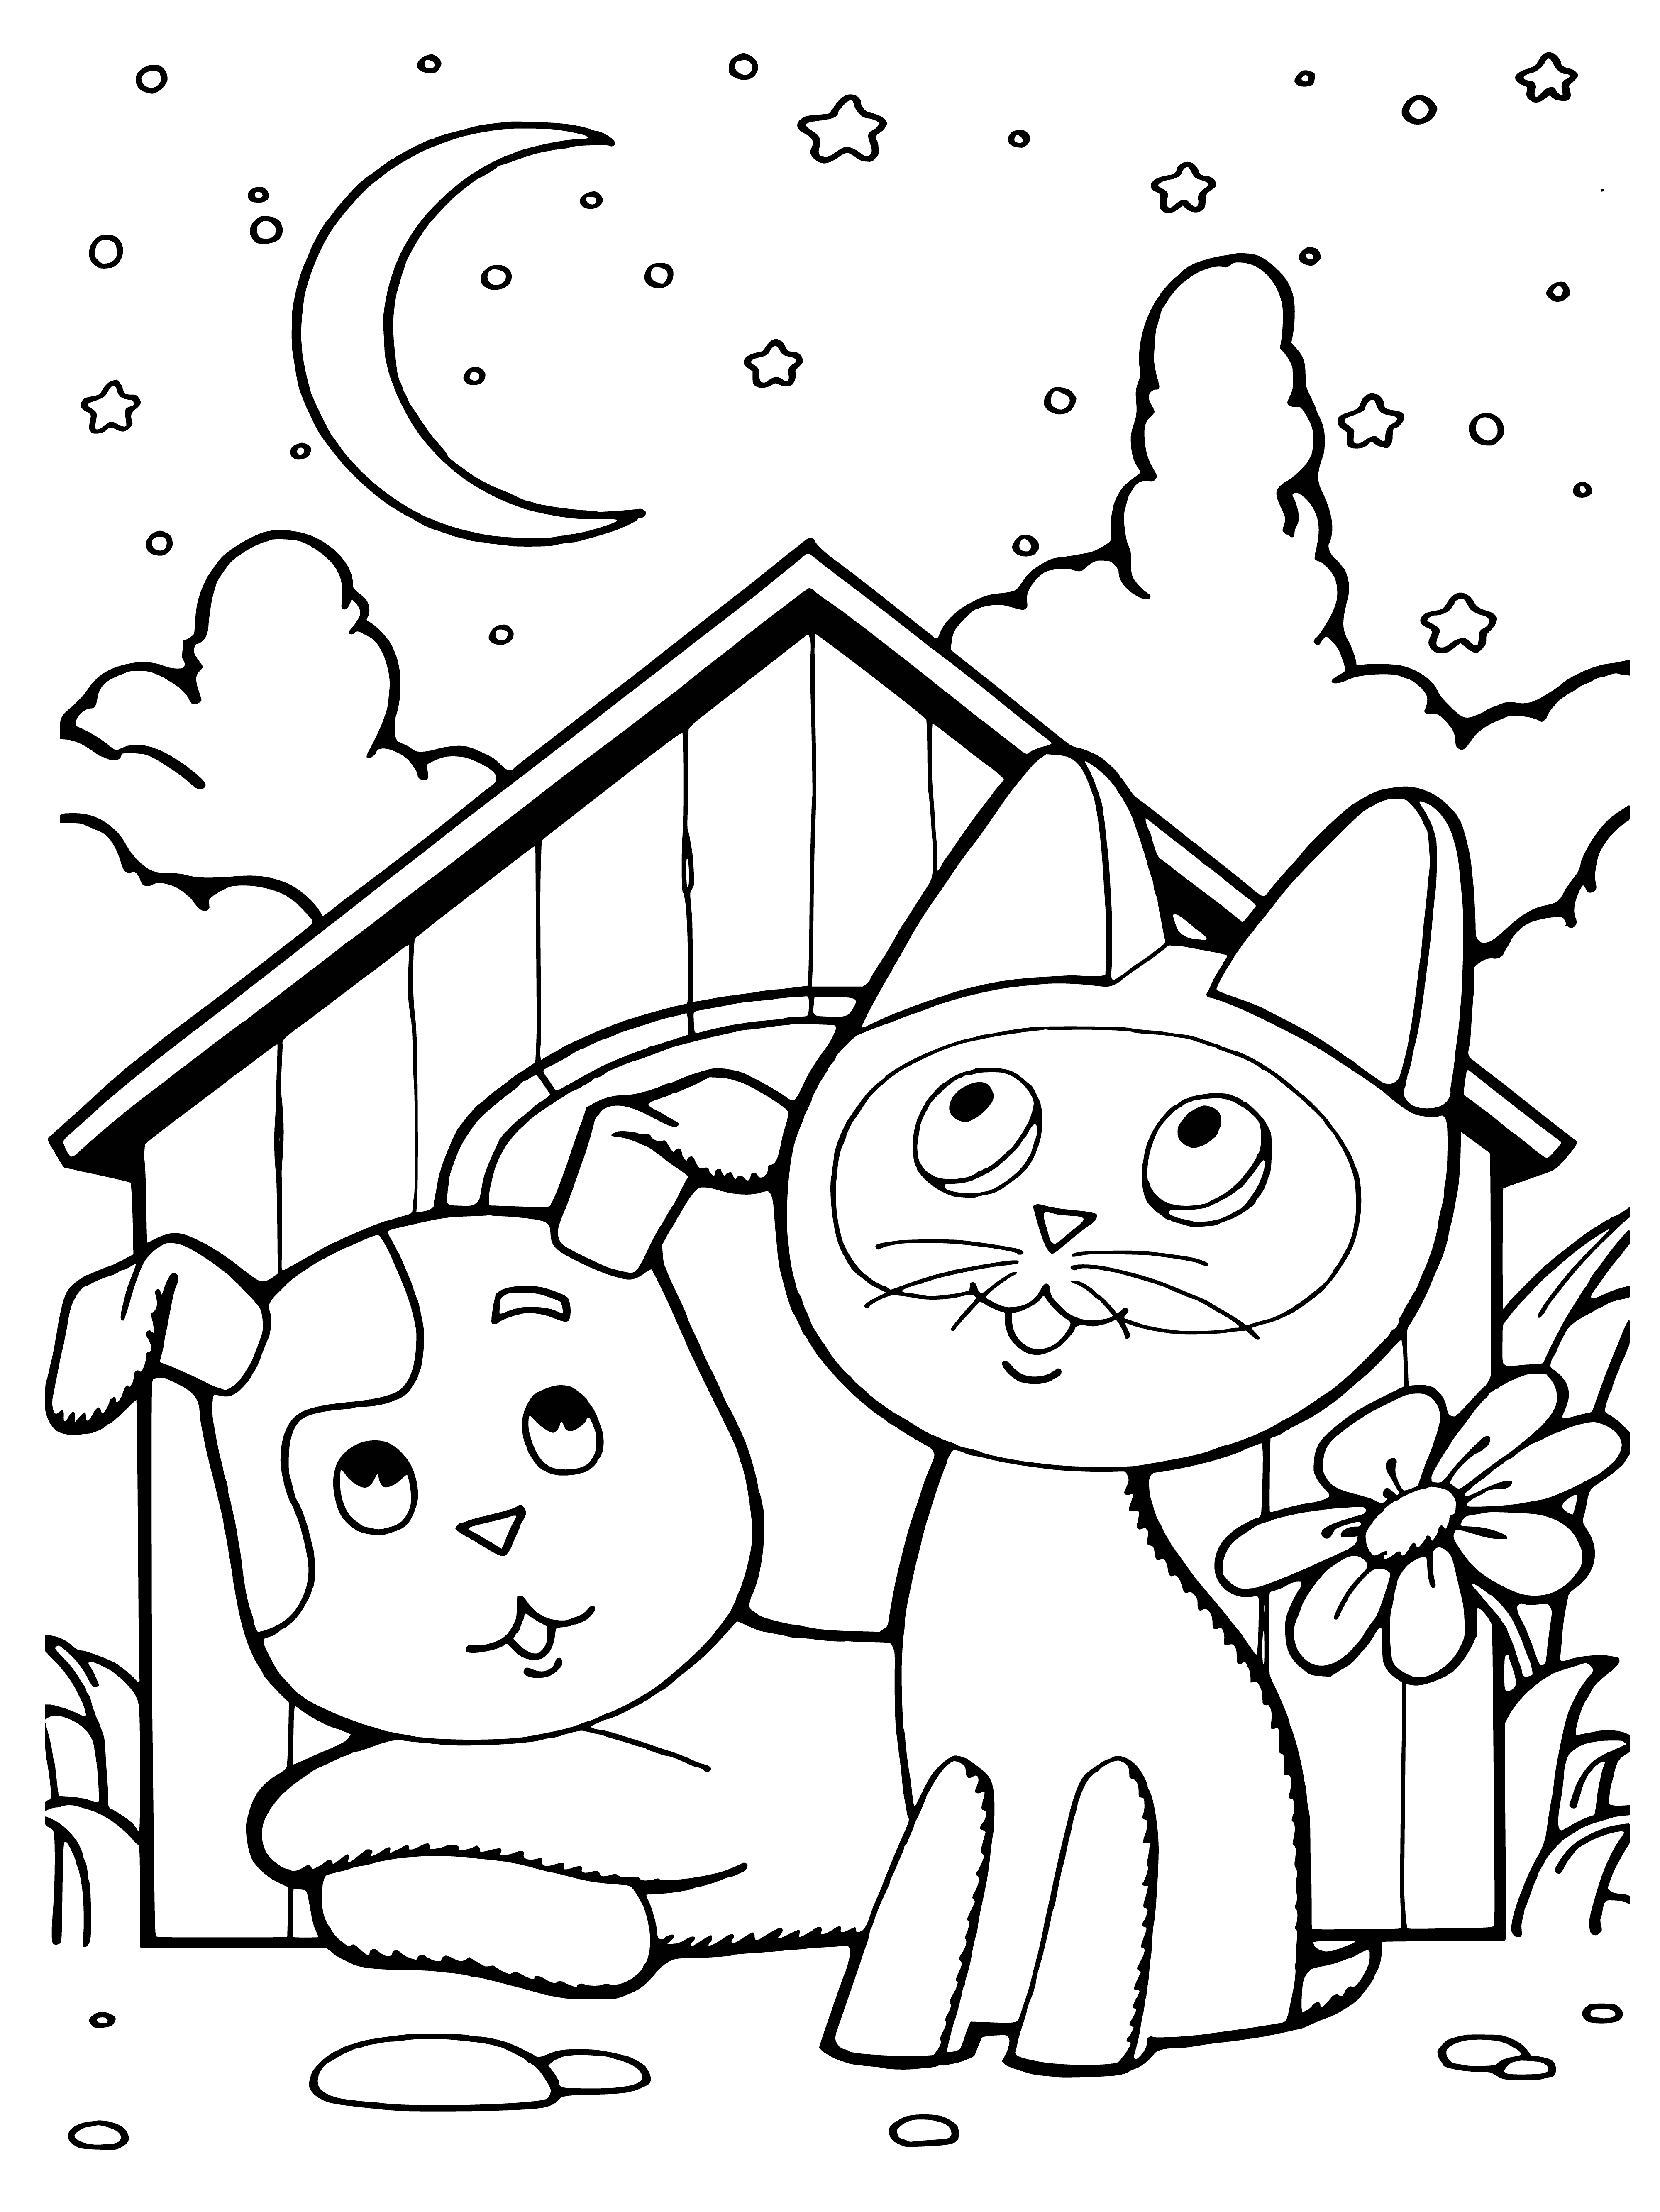 coloring page: A small light kitten and large dark cat, both with spots. The kitten meows. #cats #kitten #coloringbook